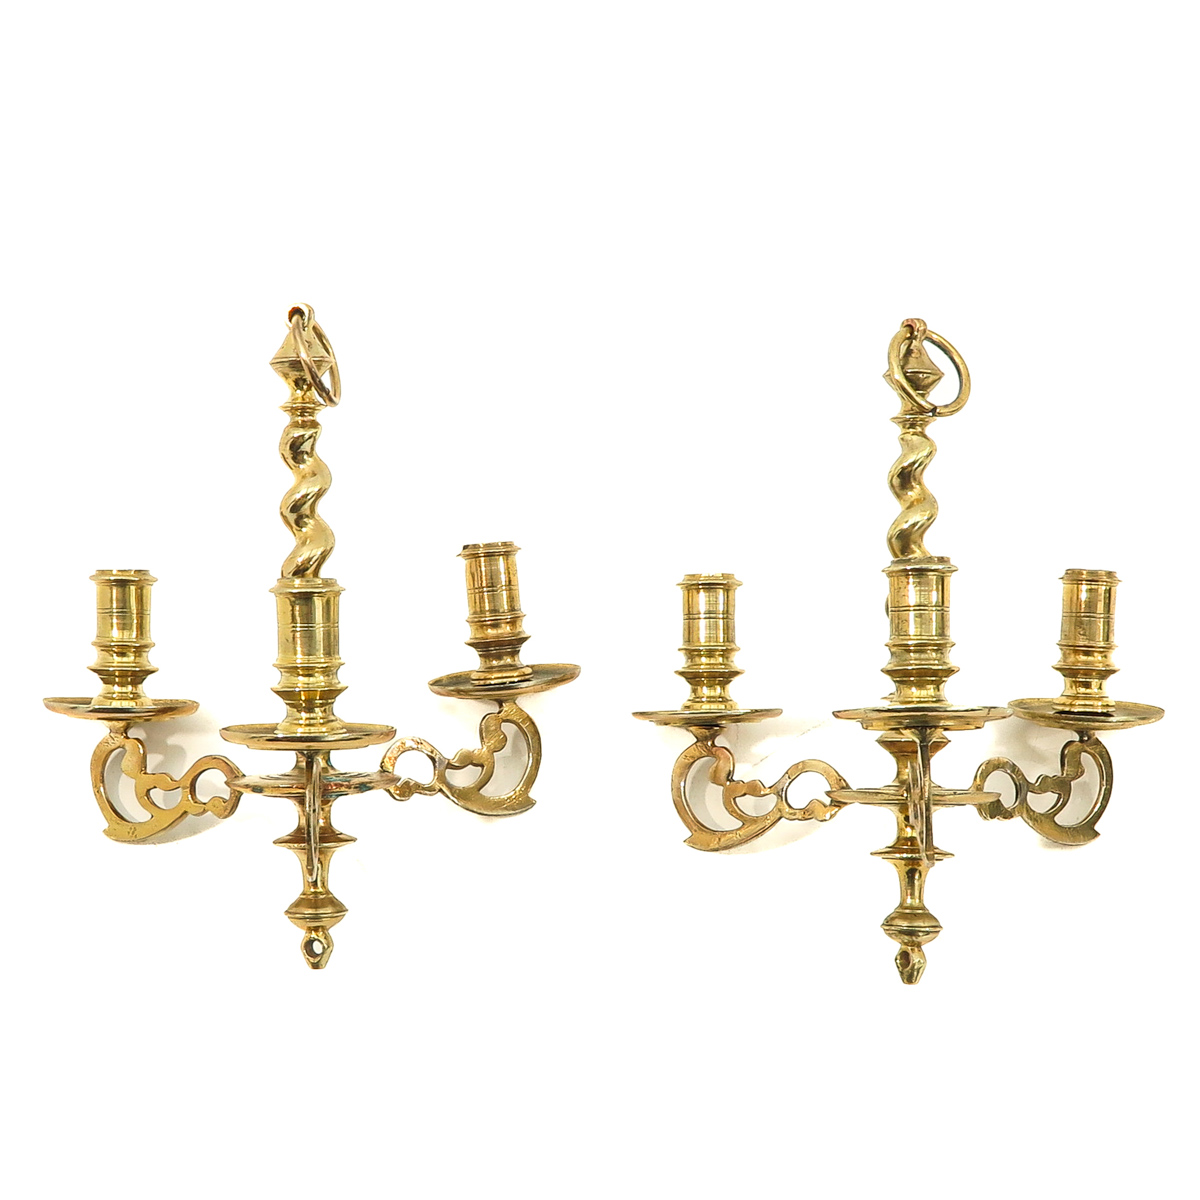 A Pair of 17th Century Candle Chandeliers - Image 2 of 8